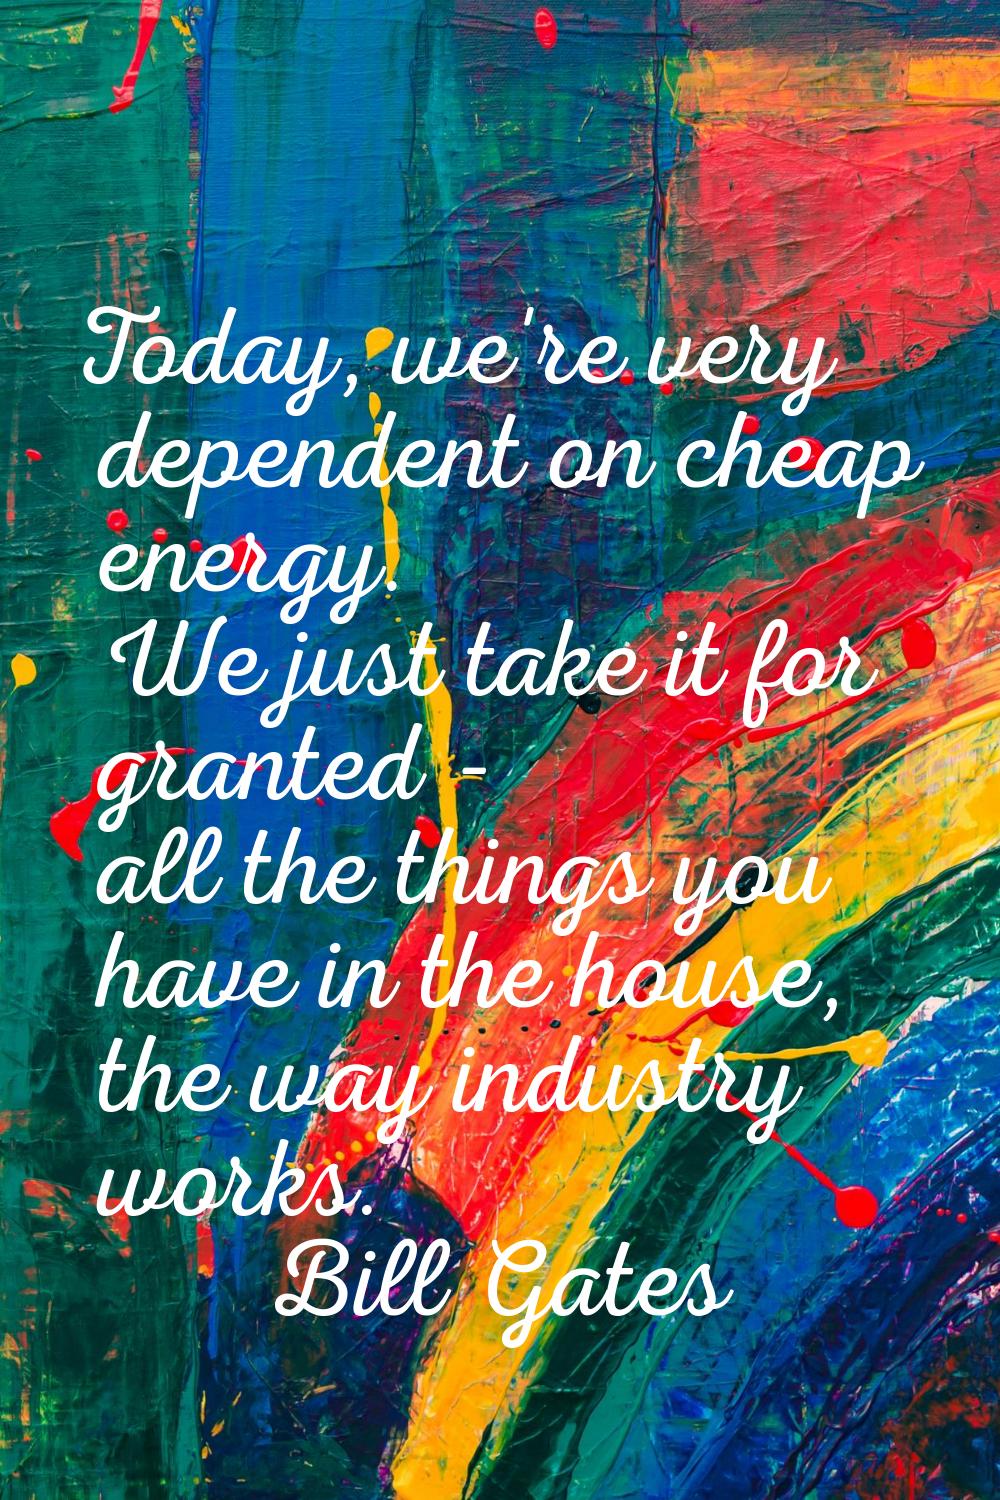 Today, we're very dependent on cheap energy. We just take it for granted - all the things you have 